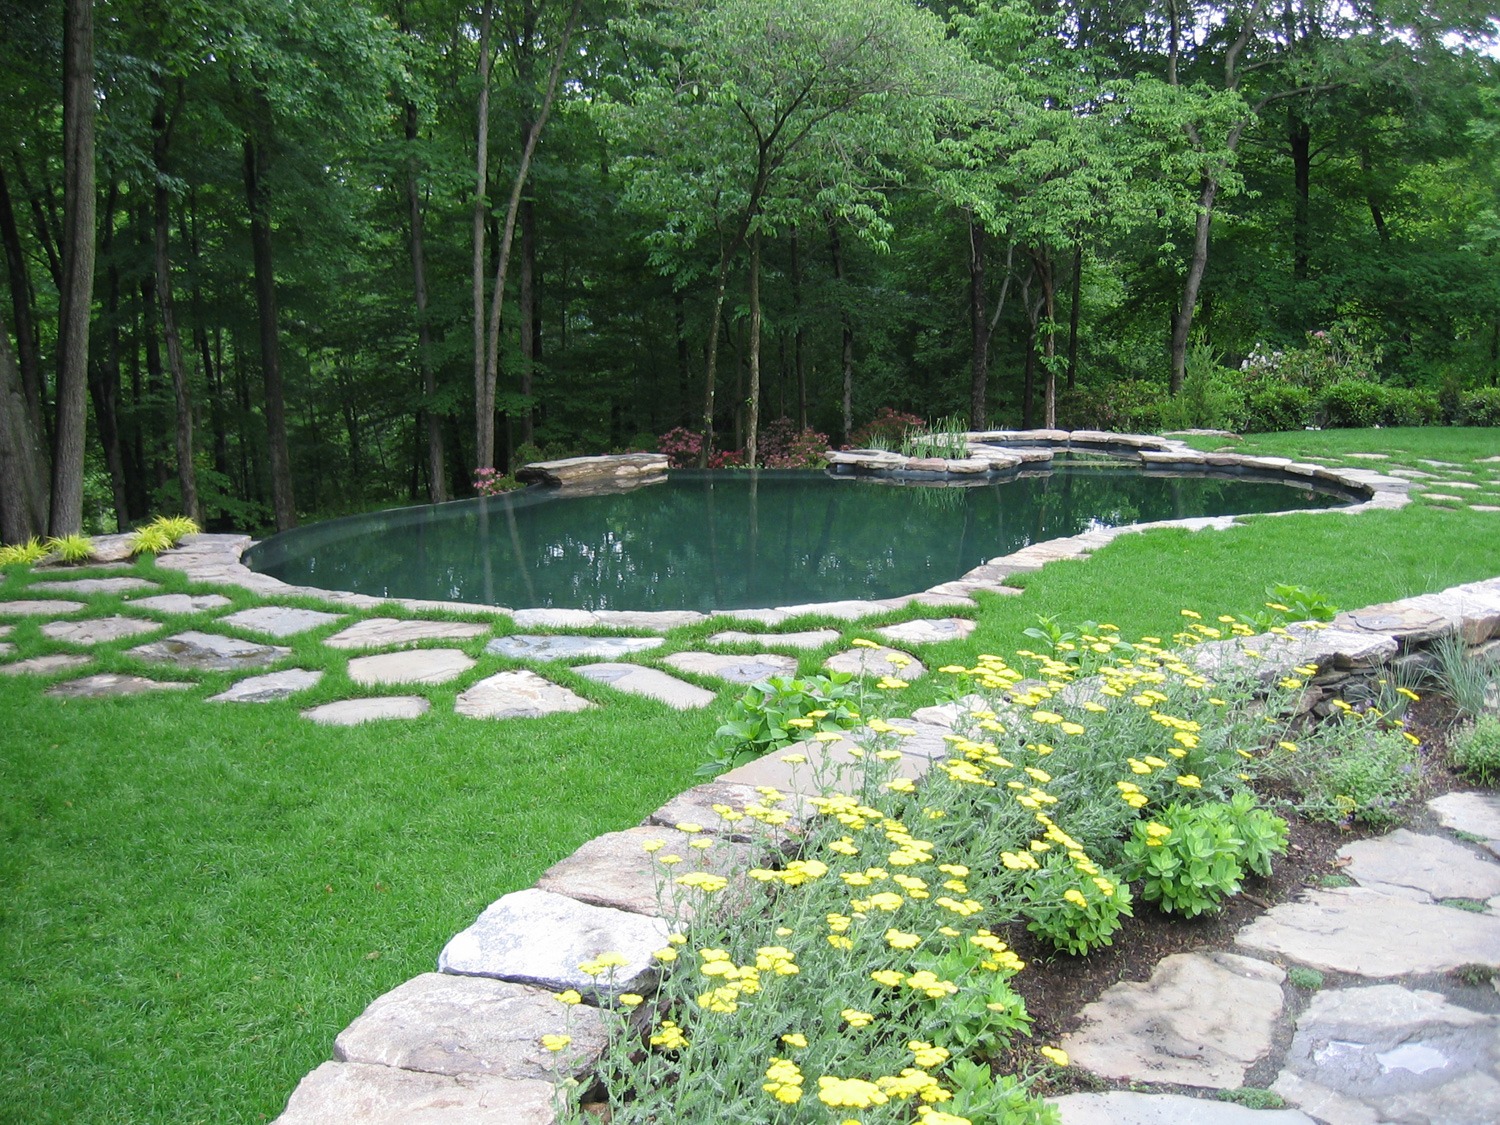 A naturalistic swimming pool with clear water is surrounded by lush greenery, stone paths, and flowering plants, creating a serene backyard oasis.